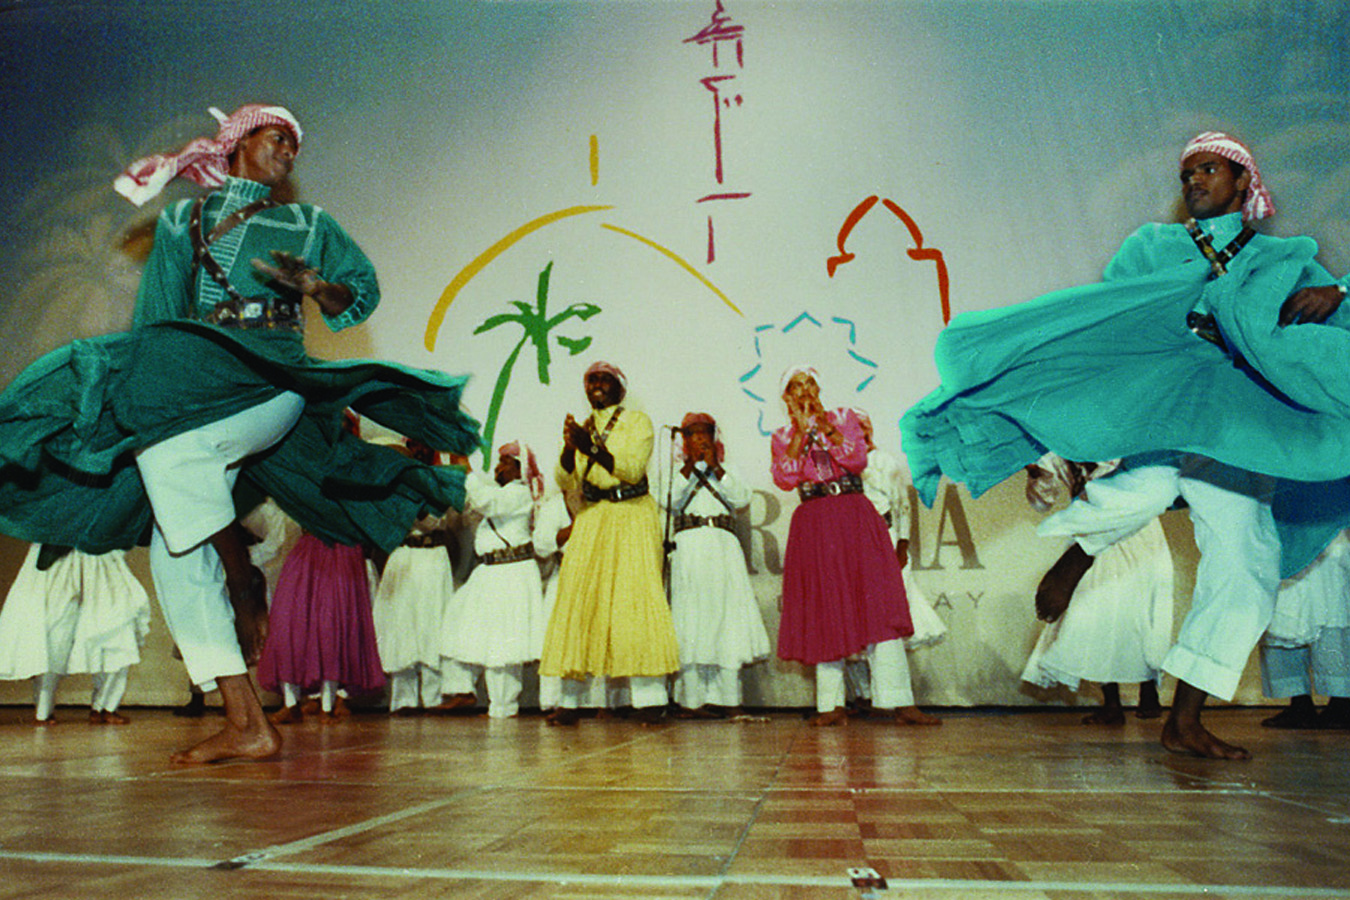 Ksa Dance : MAIN STAGE: Bedouin Dancers – 24-Man Troupe Performed 4 times Daily